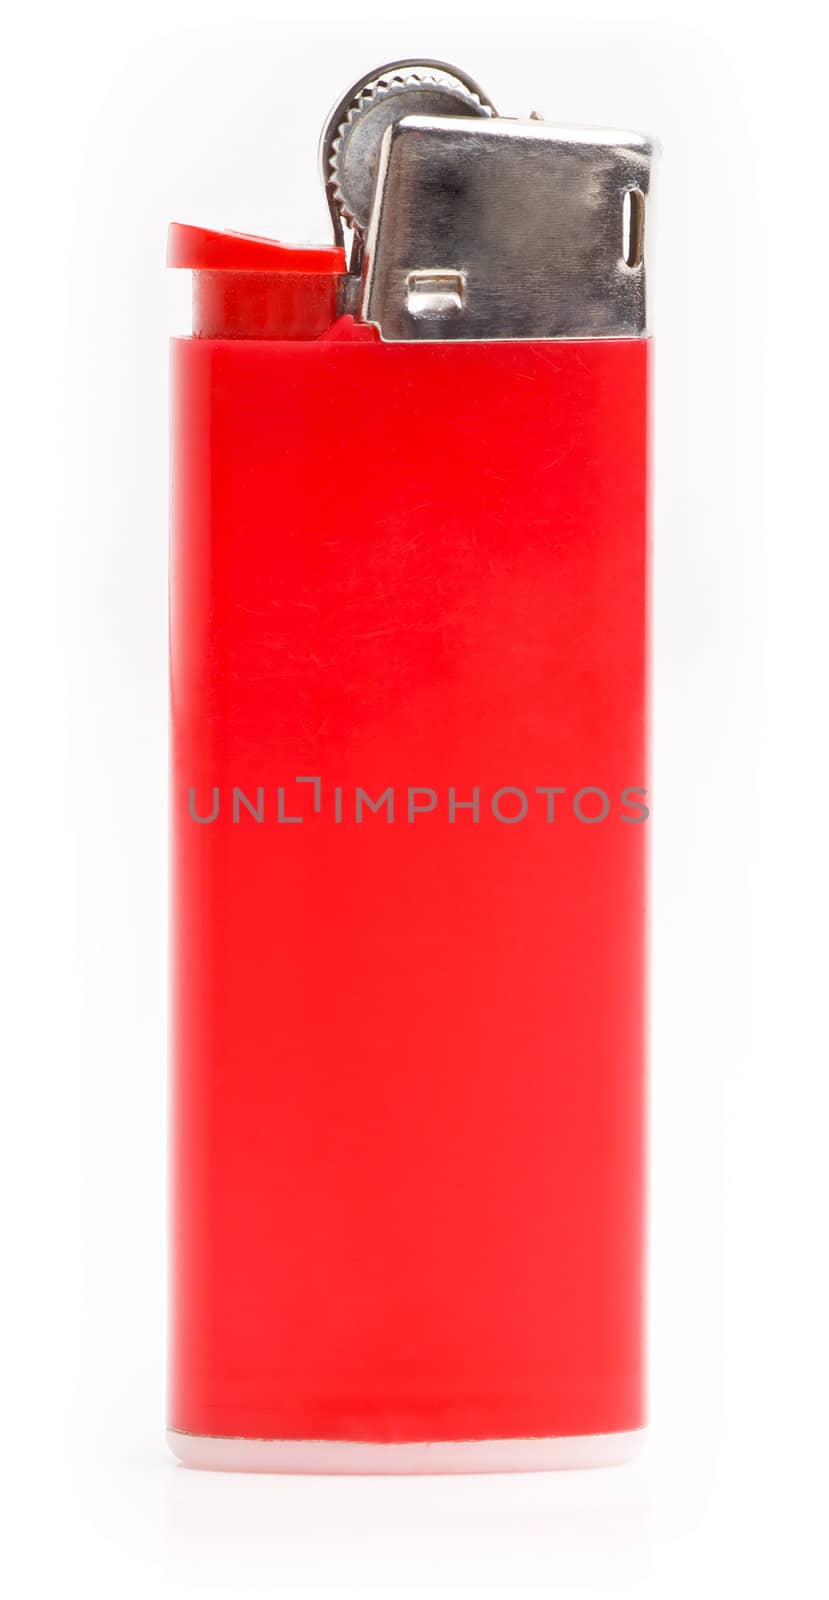 Red cigarette lighter. Isolated on white.